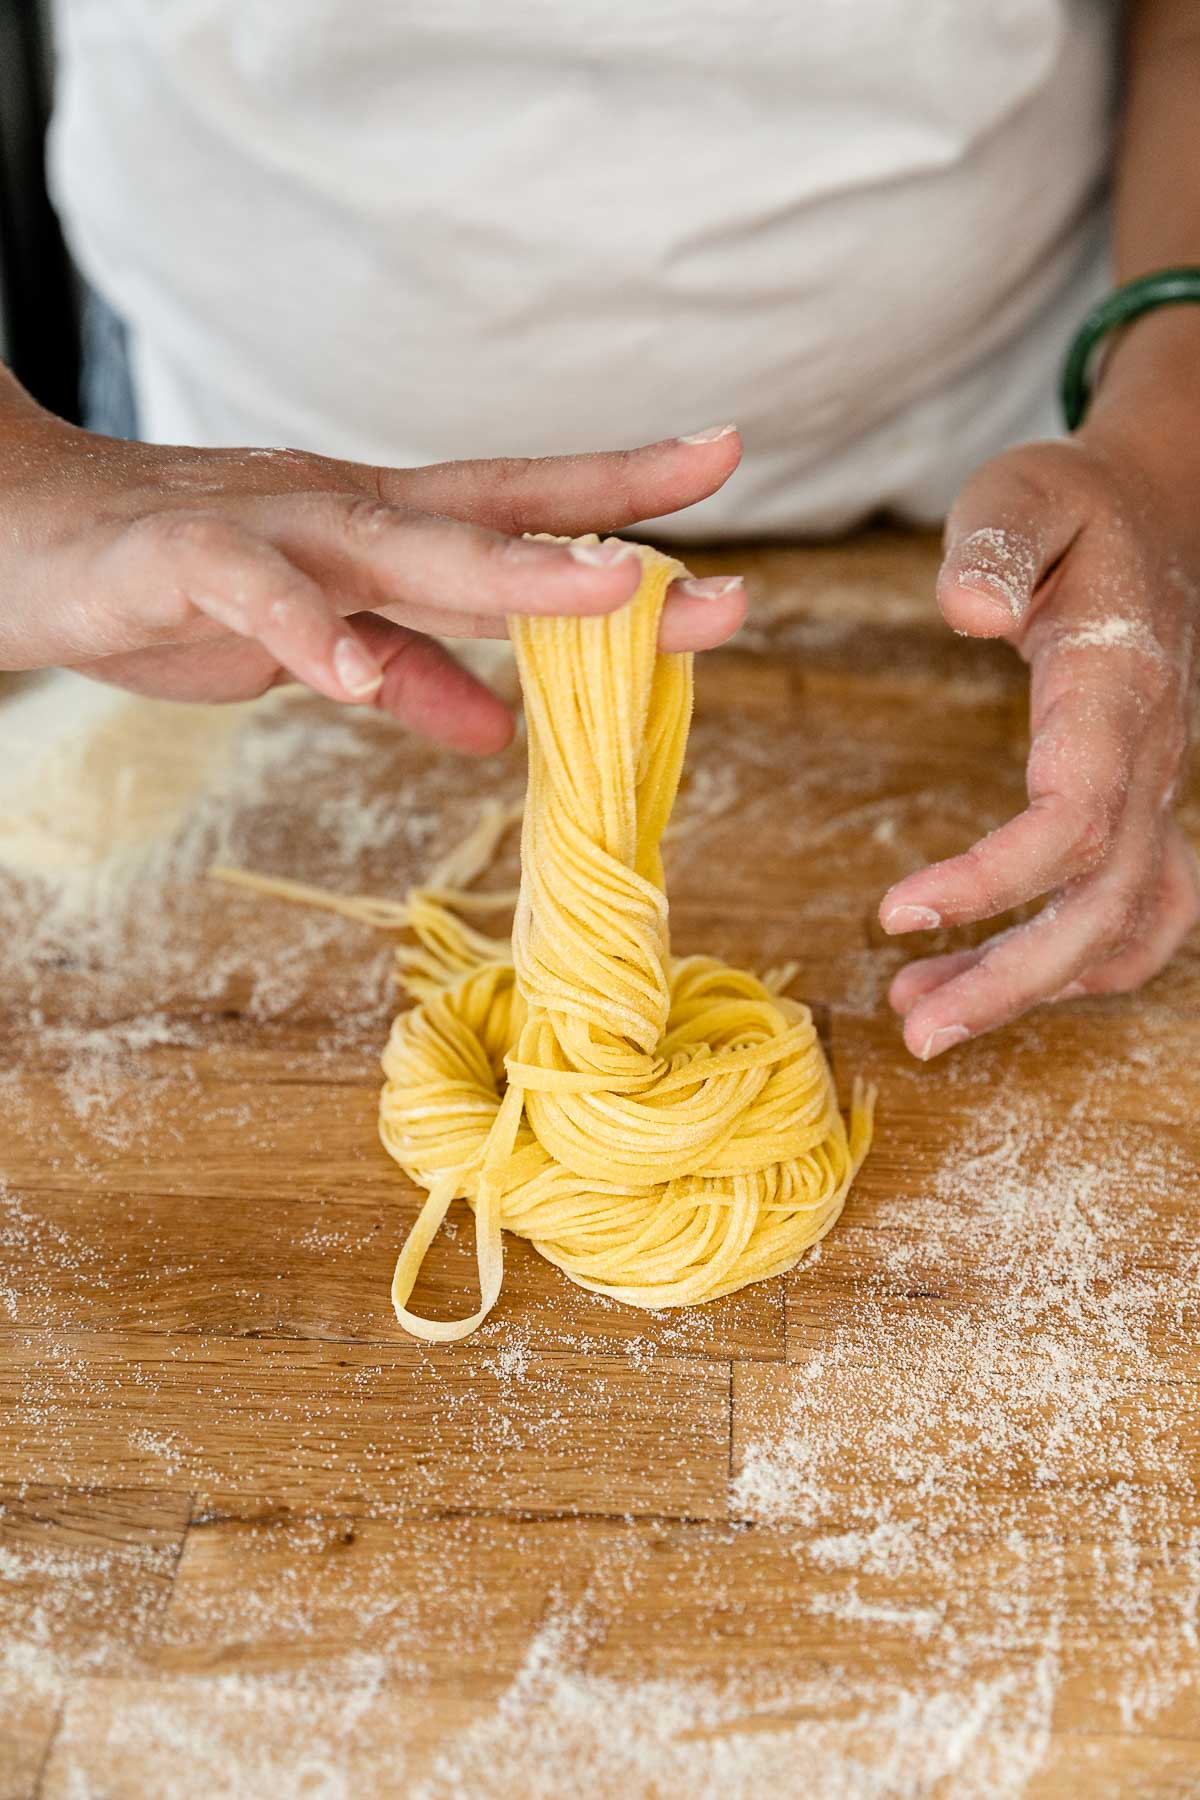 A side angle shot of a woman's hands forming a bundle of fresh pasta from homemade pasta dough cut into spaghetti noddles. The noodles are draped across her middle finger as she twists and lets the noodles fall into a loose bundle. The bundle rests atop a butcher block countertop that is dusted with semolina flour.